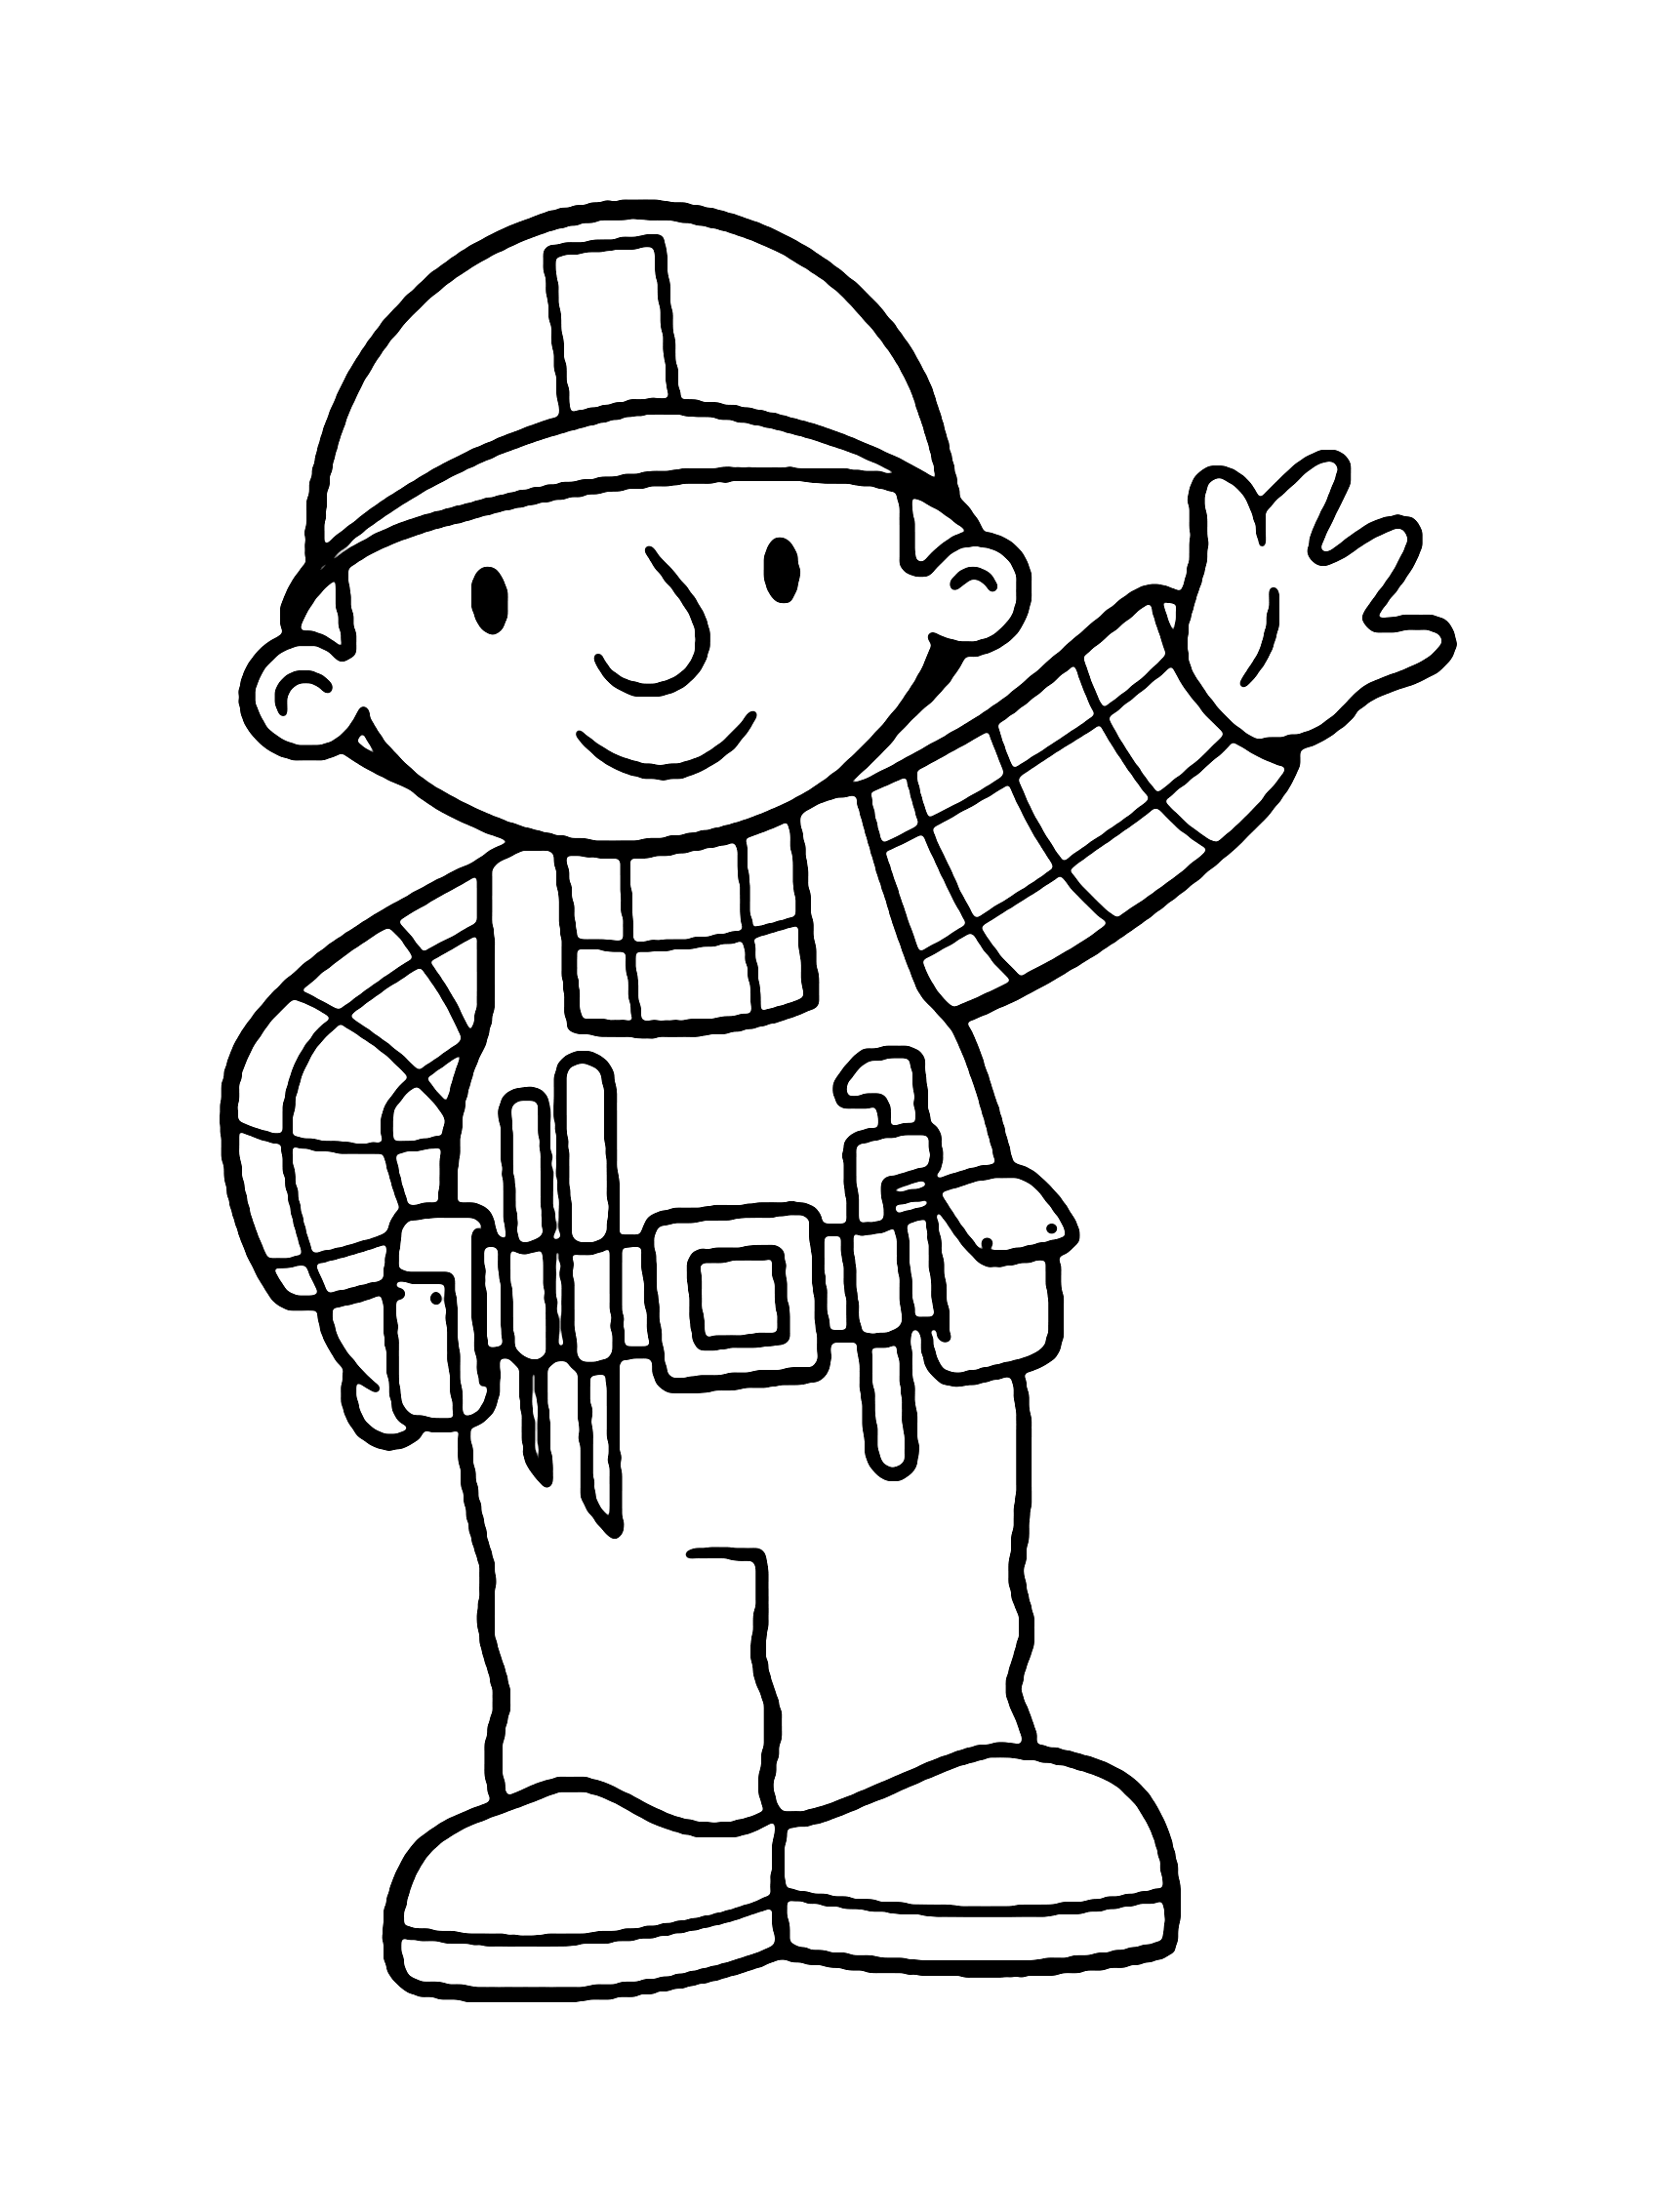 Bob the Builder Can we Fit it Yes We Can Coloring Page